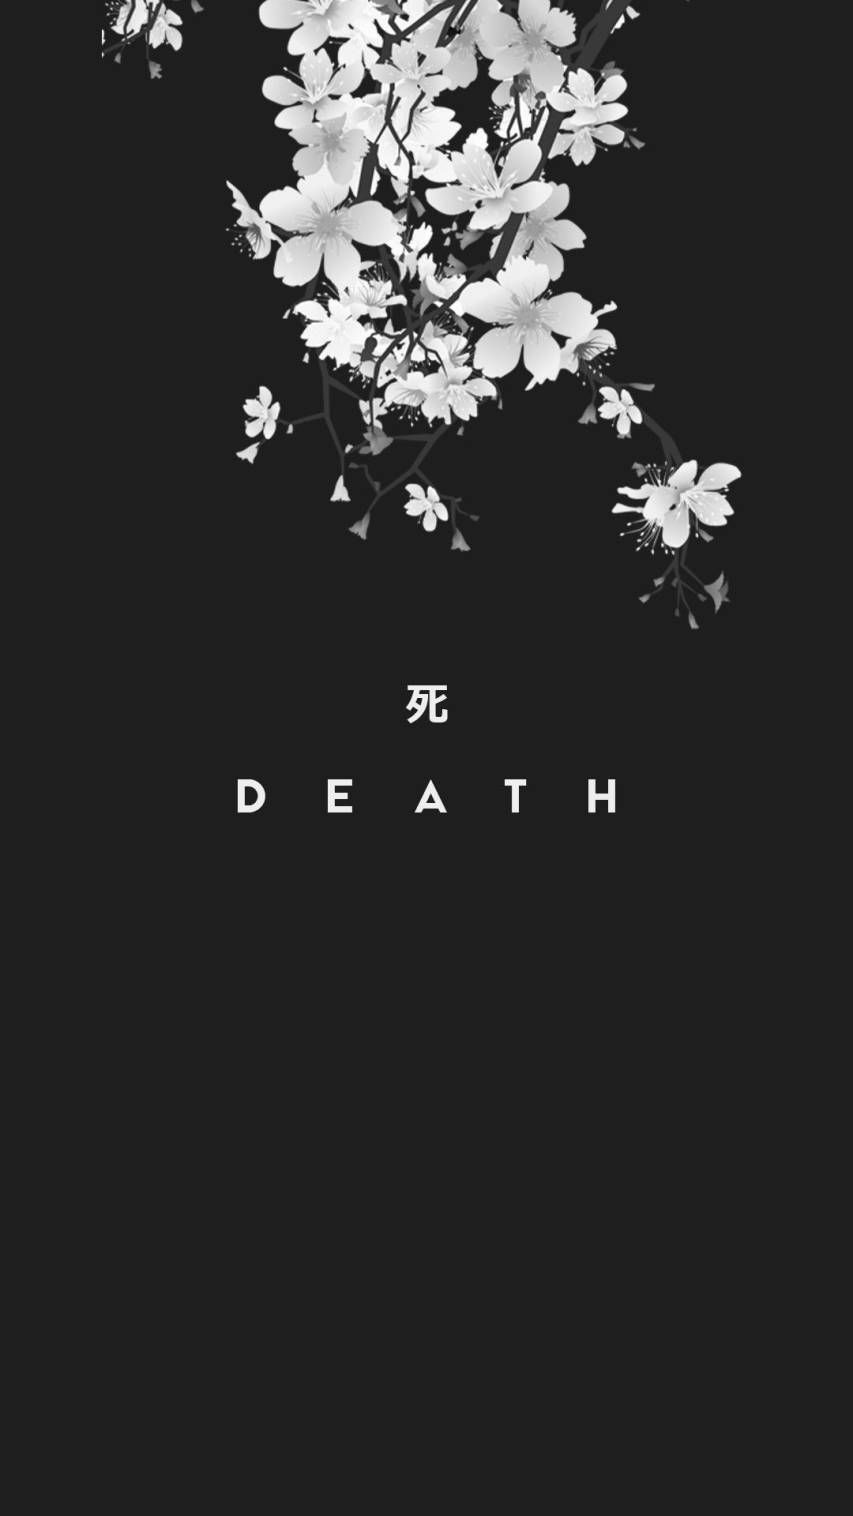 The death of flowers wallpaper - Black and white